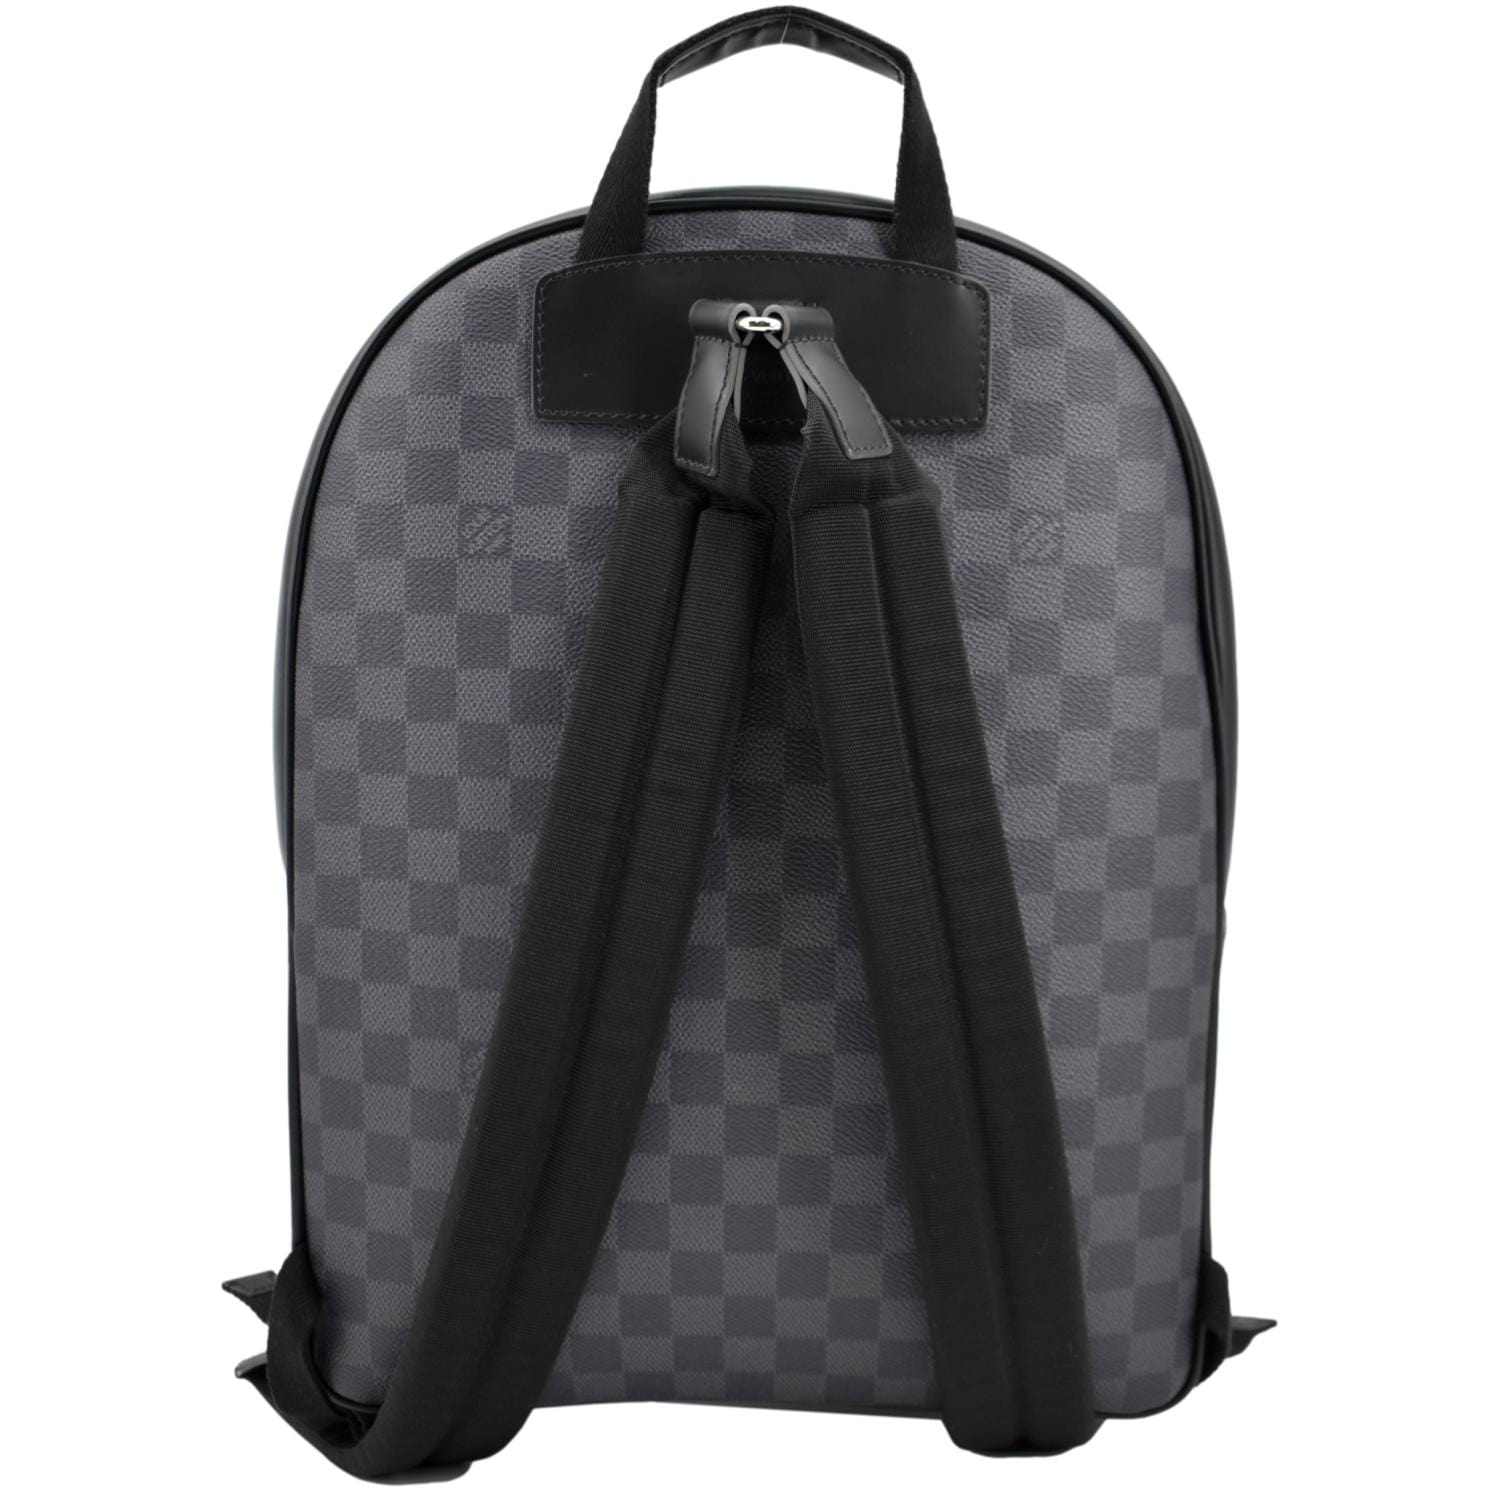 black and red lv backpack